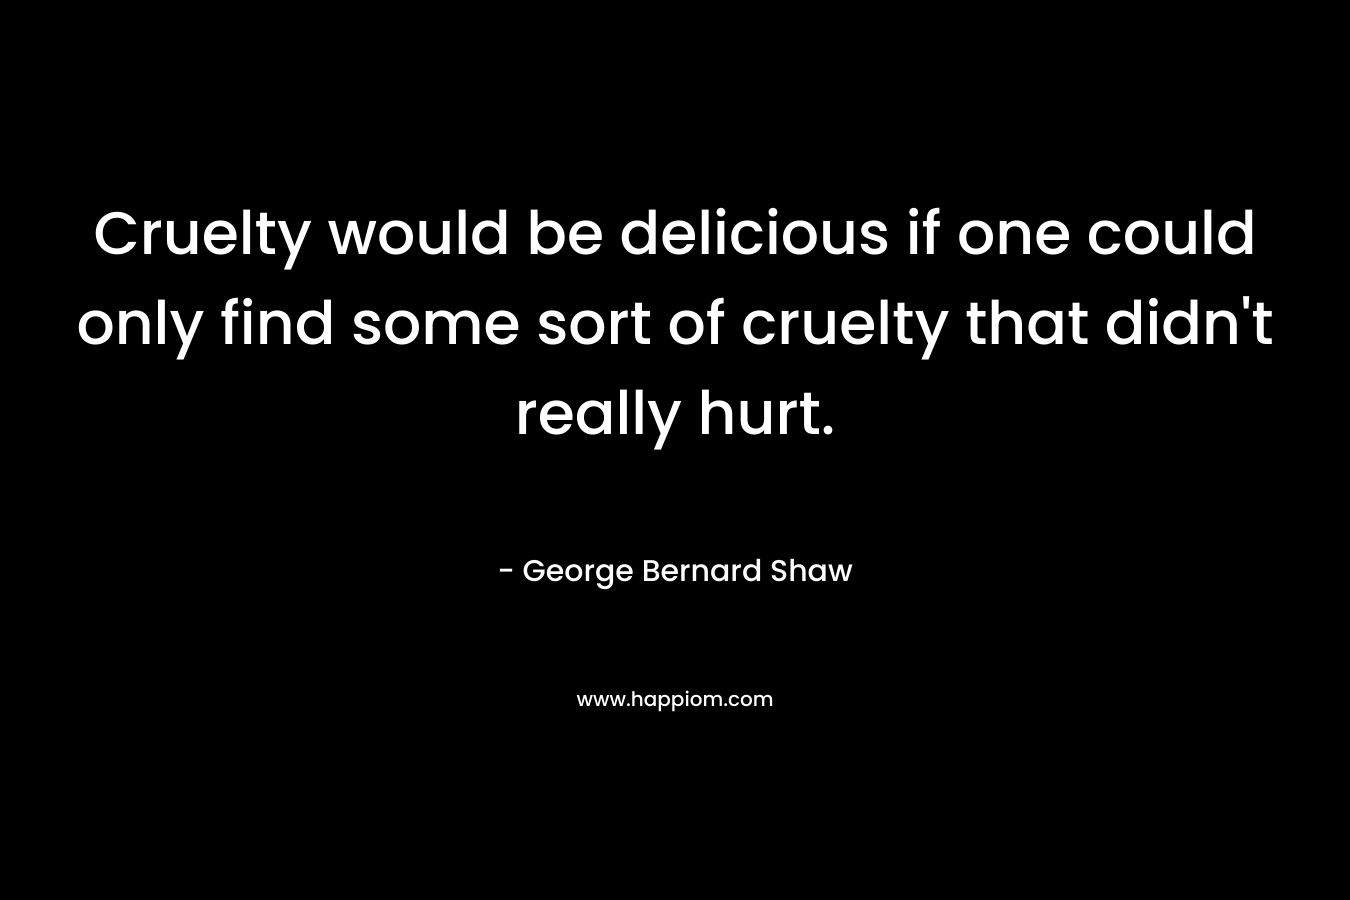 Cruelty would be delicious if one could only find some sort of cruelty that didn’t really hurt. – George Bernard Shaw